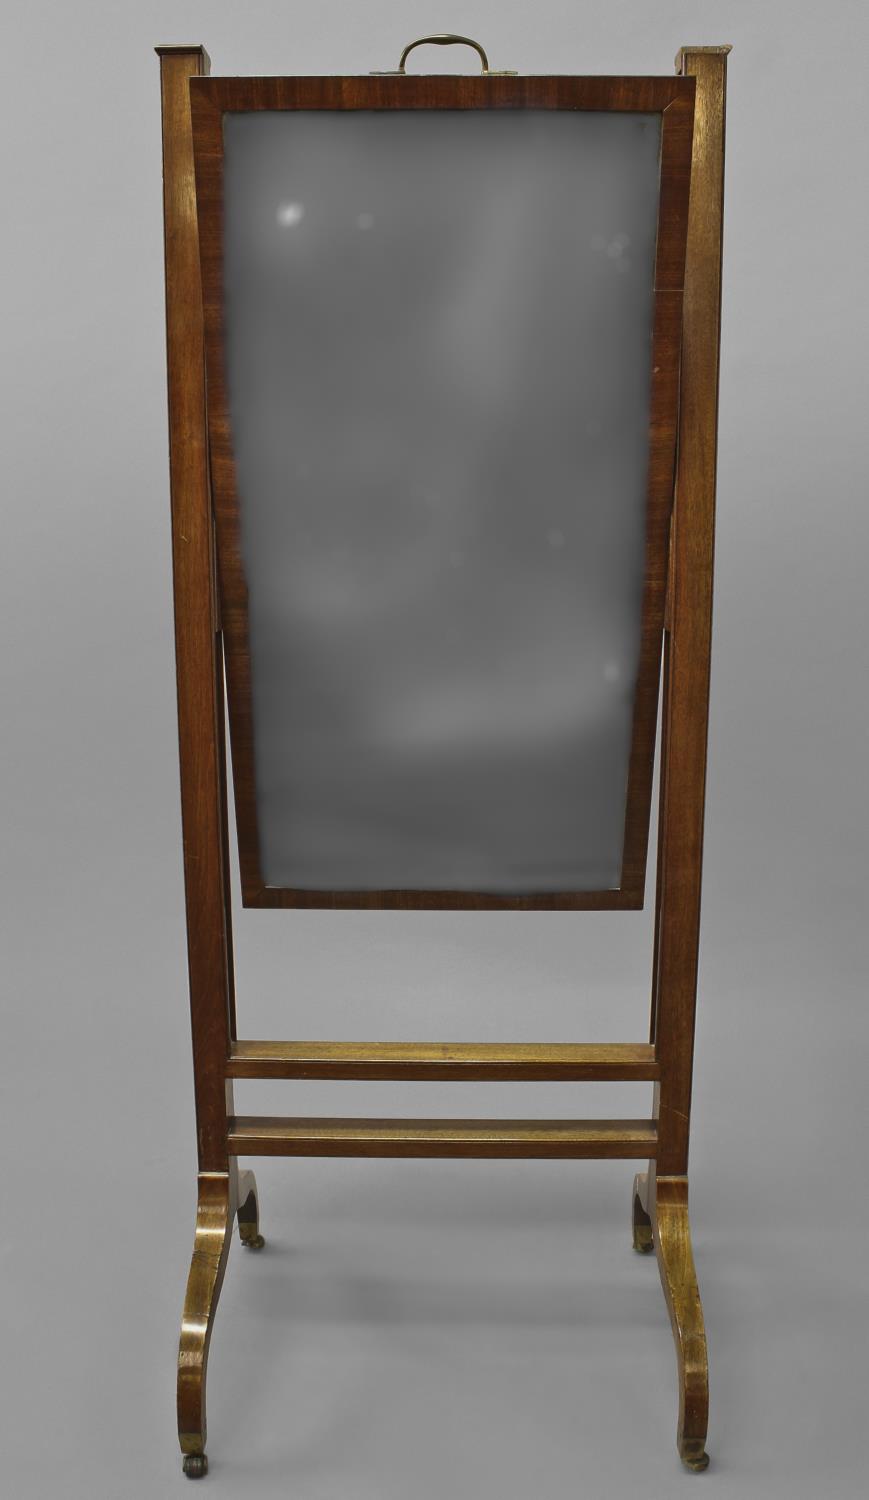 A LATE GEORGE III MAHOGANY FRAMED CHEVAL MIRROR, with a rising rectangular plate with bevelled edge,